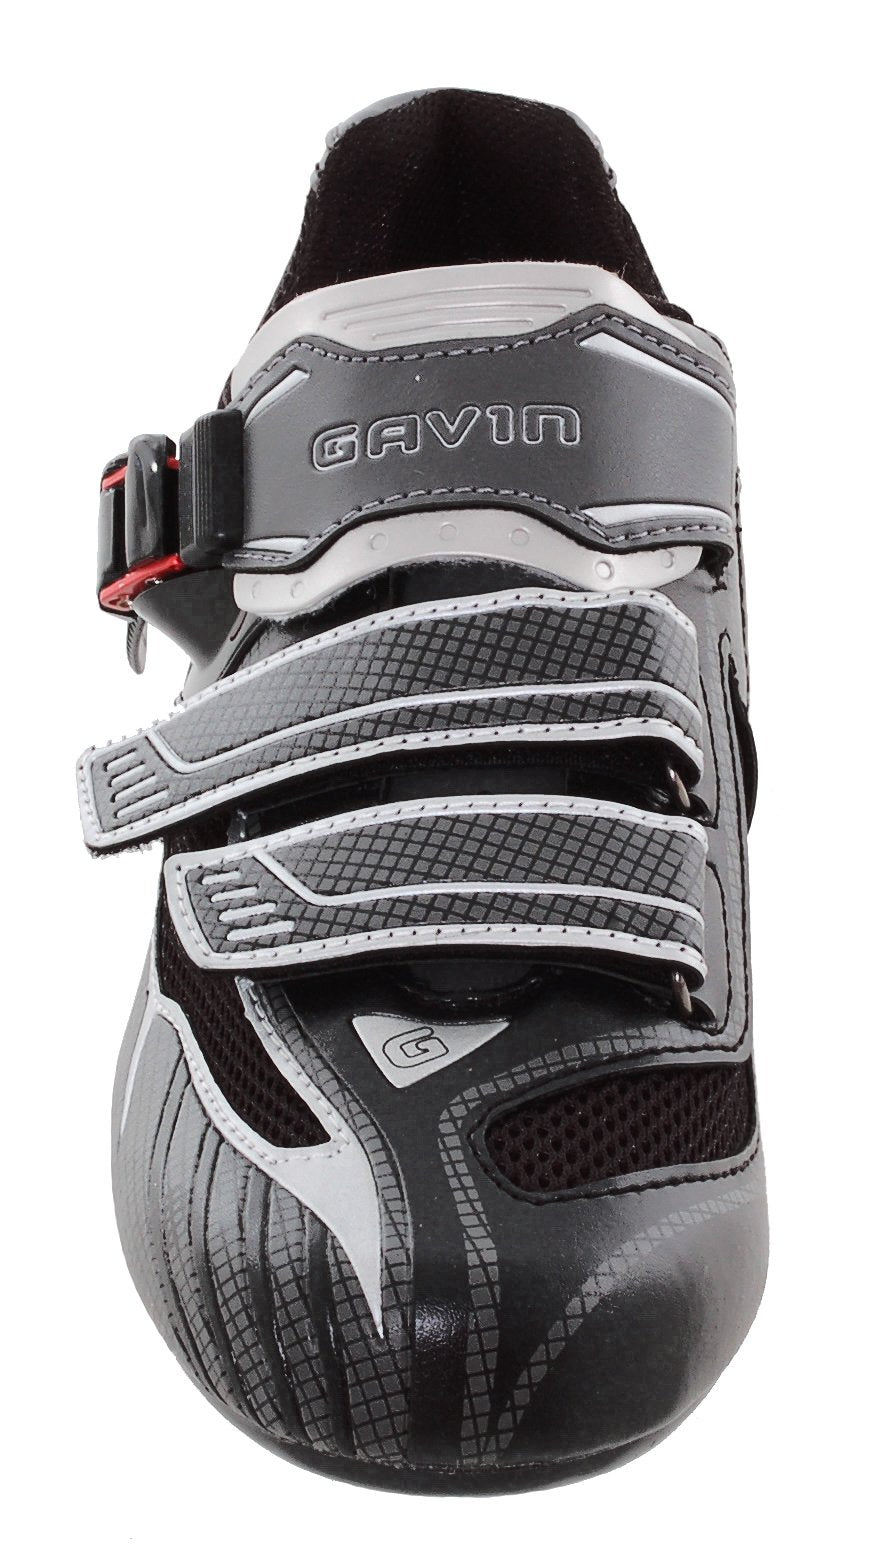 Gavin Elite Road Cycling Shoe - 2 and 3 